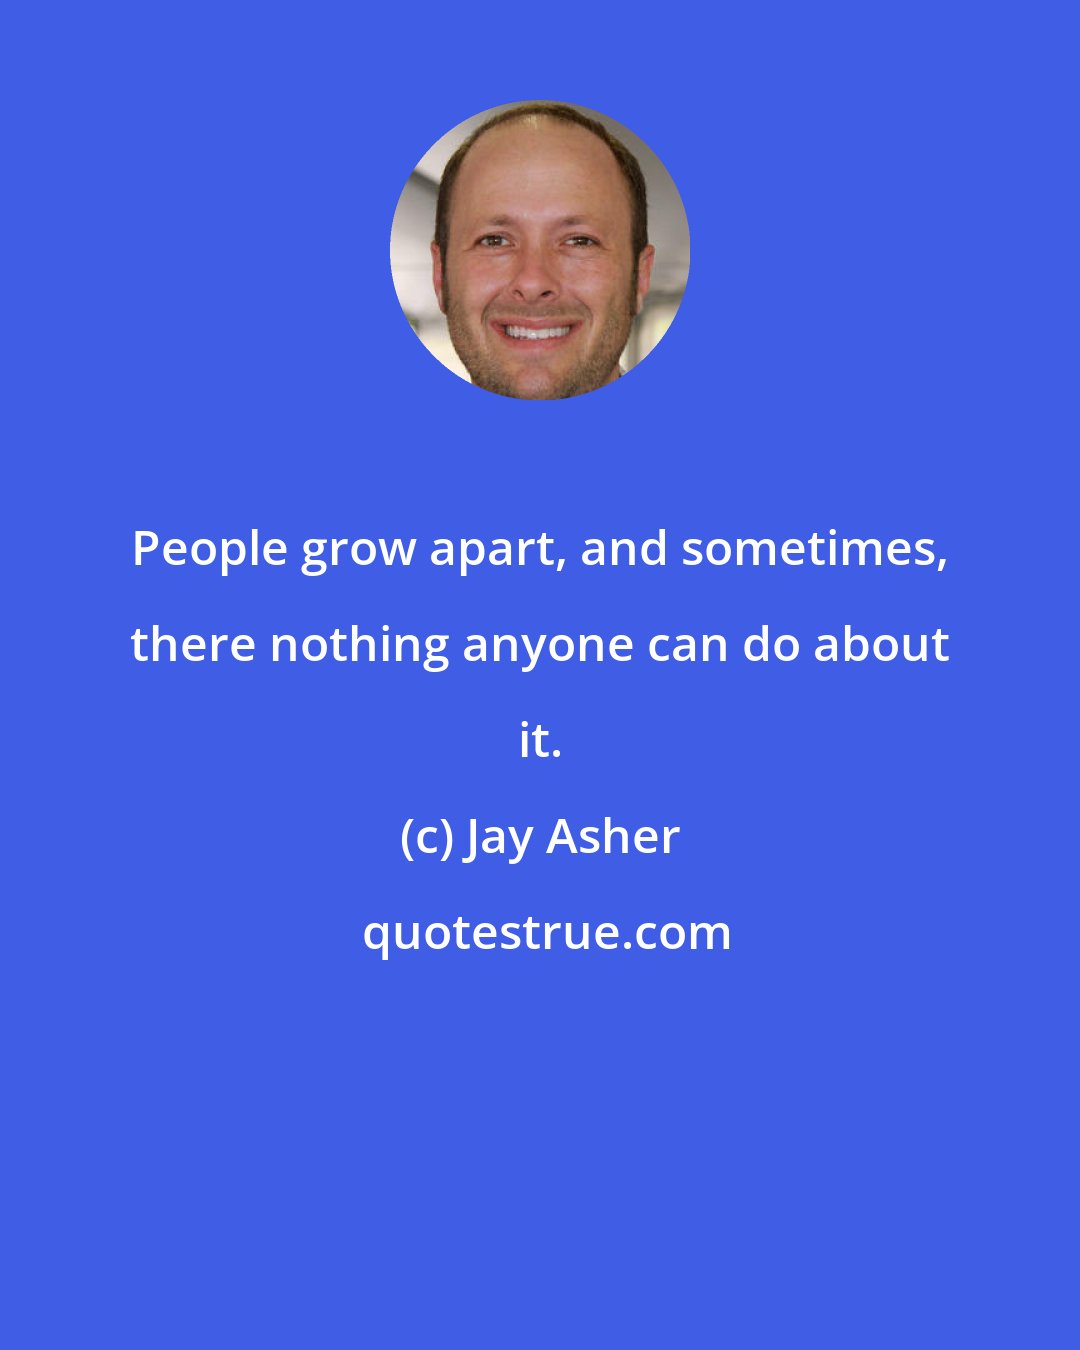 Jay Asher: People grow apart, and sometimes, there nothing anyone can do about it.